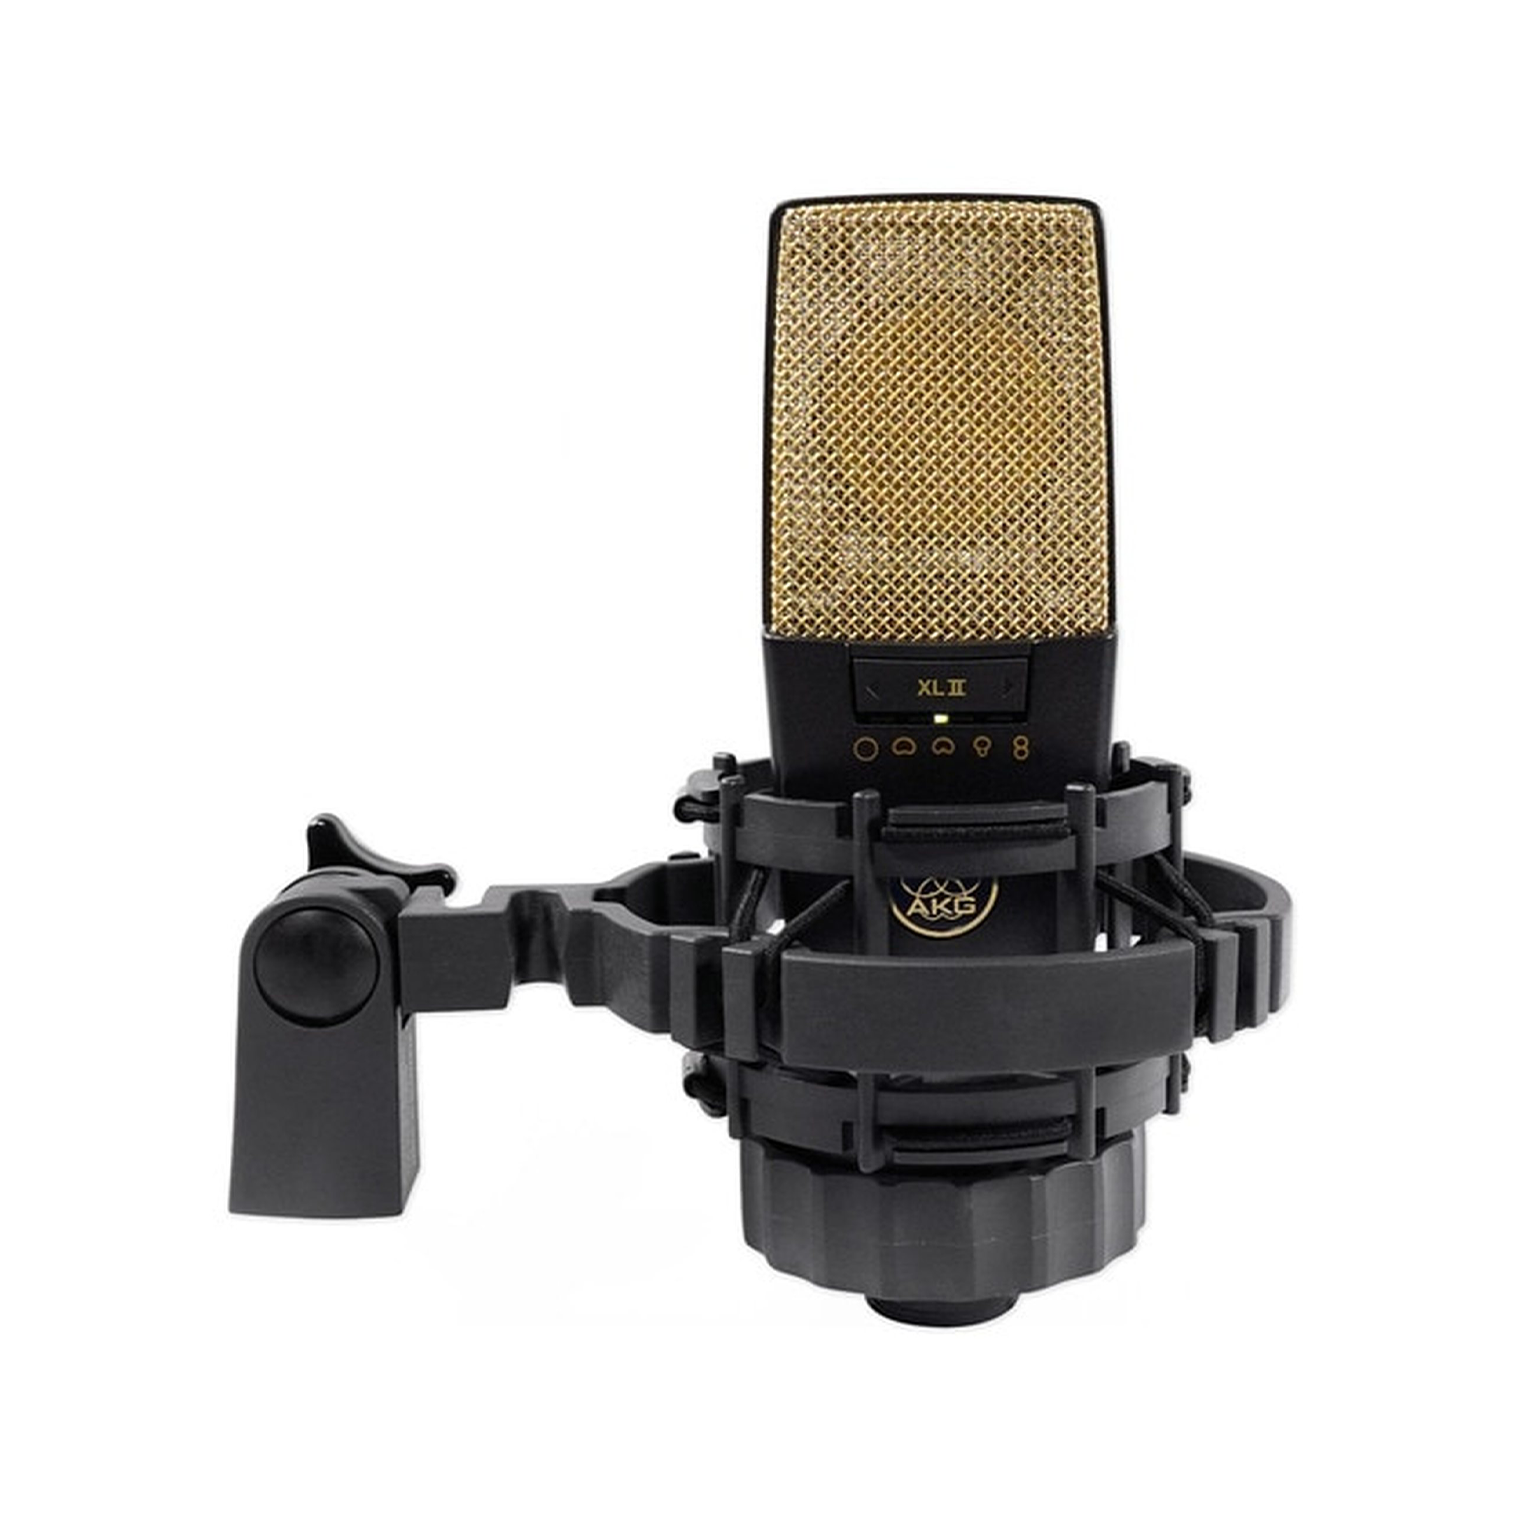 AKG C414 XLS REFERENCE MULTIPATTERN CONDENSER MICROPHONE